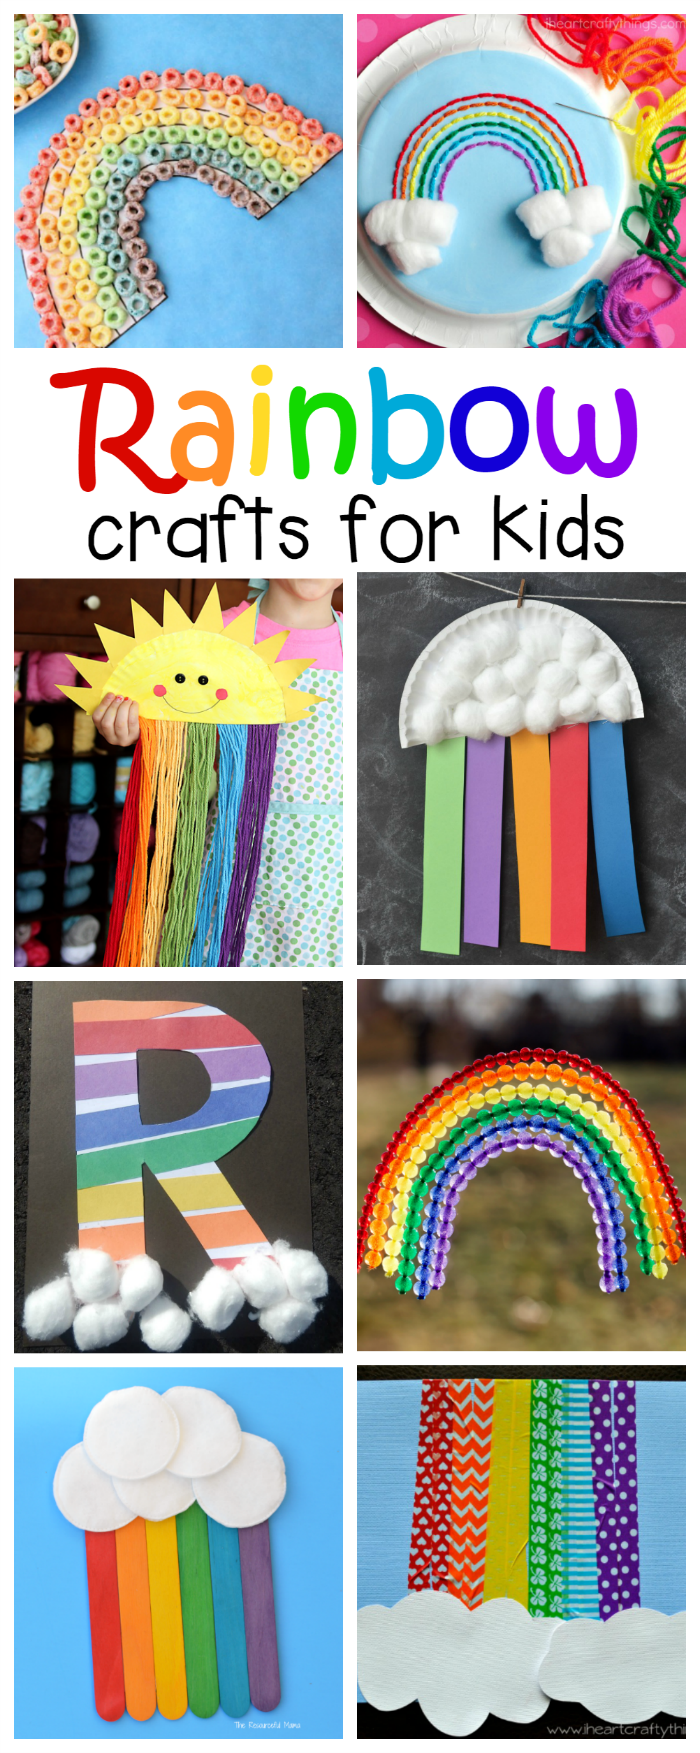 Lots of great rainbow crafts that kids can make for spring, summer, St. Patrick’s Day or letter R.